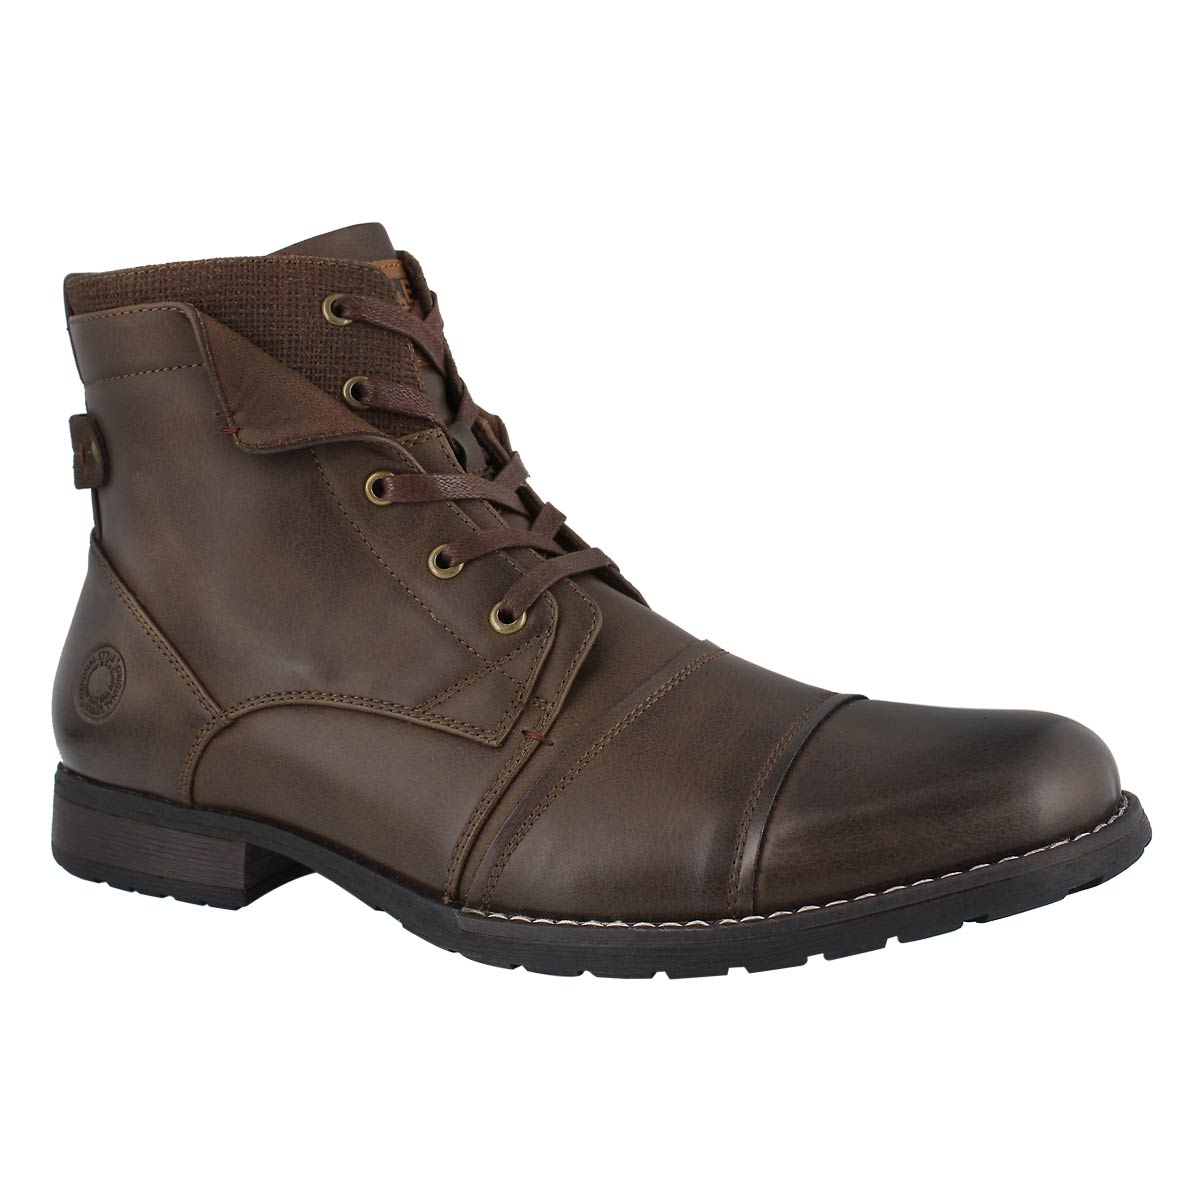 SoftMoc Men's BAKER brown lace up ankle 